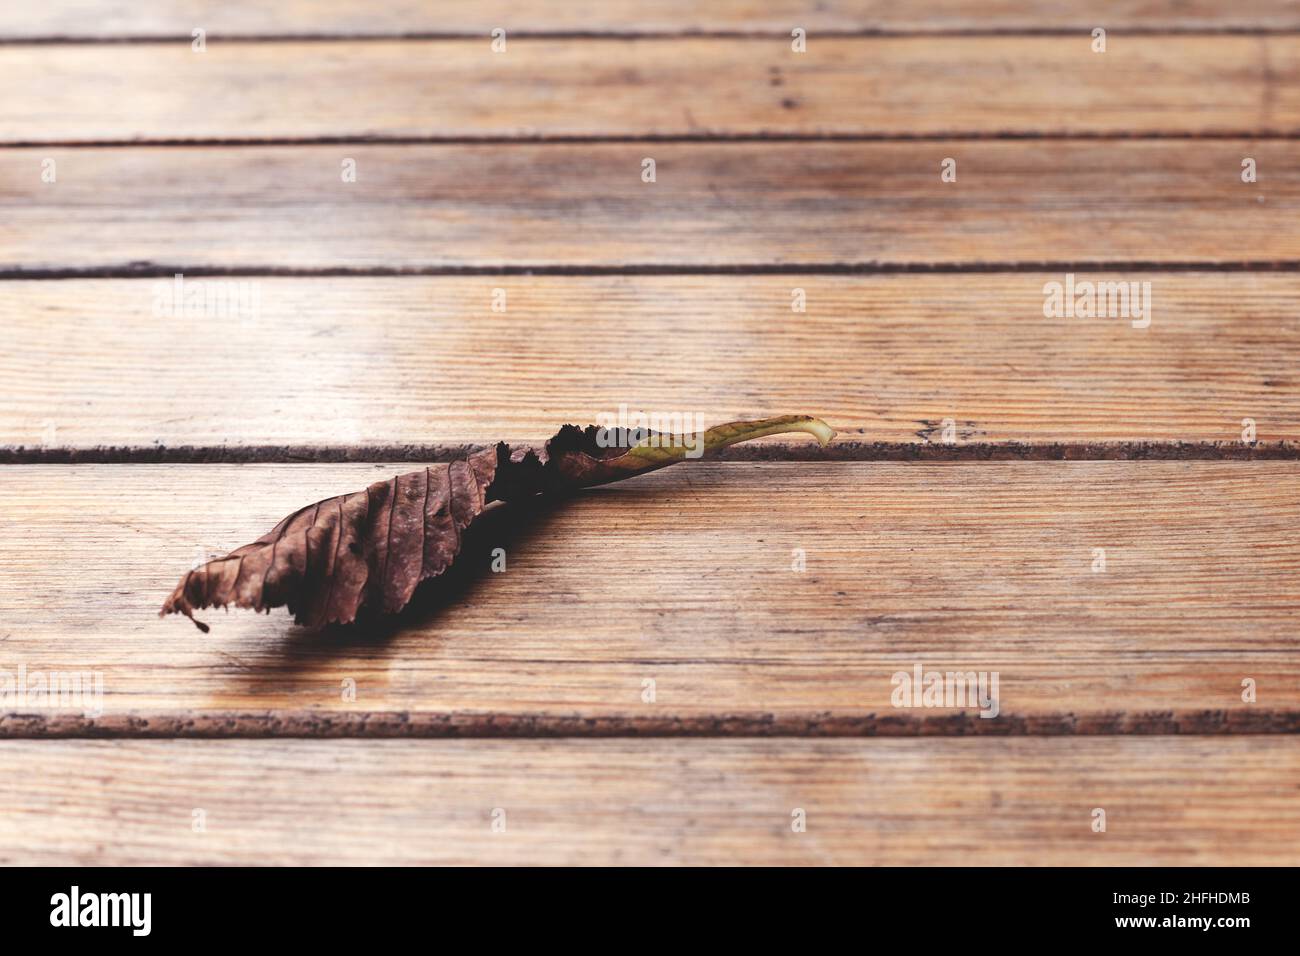 Old wood planks, perfect background for your concept or project. Stock Photo